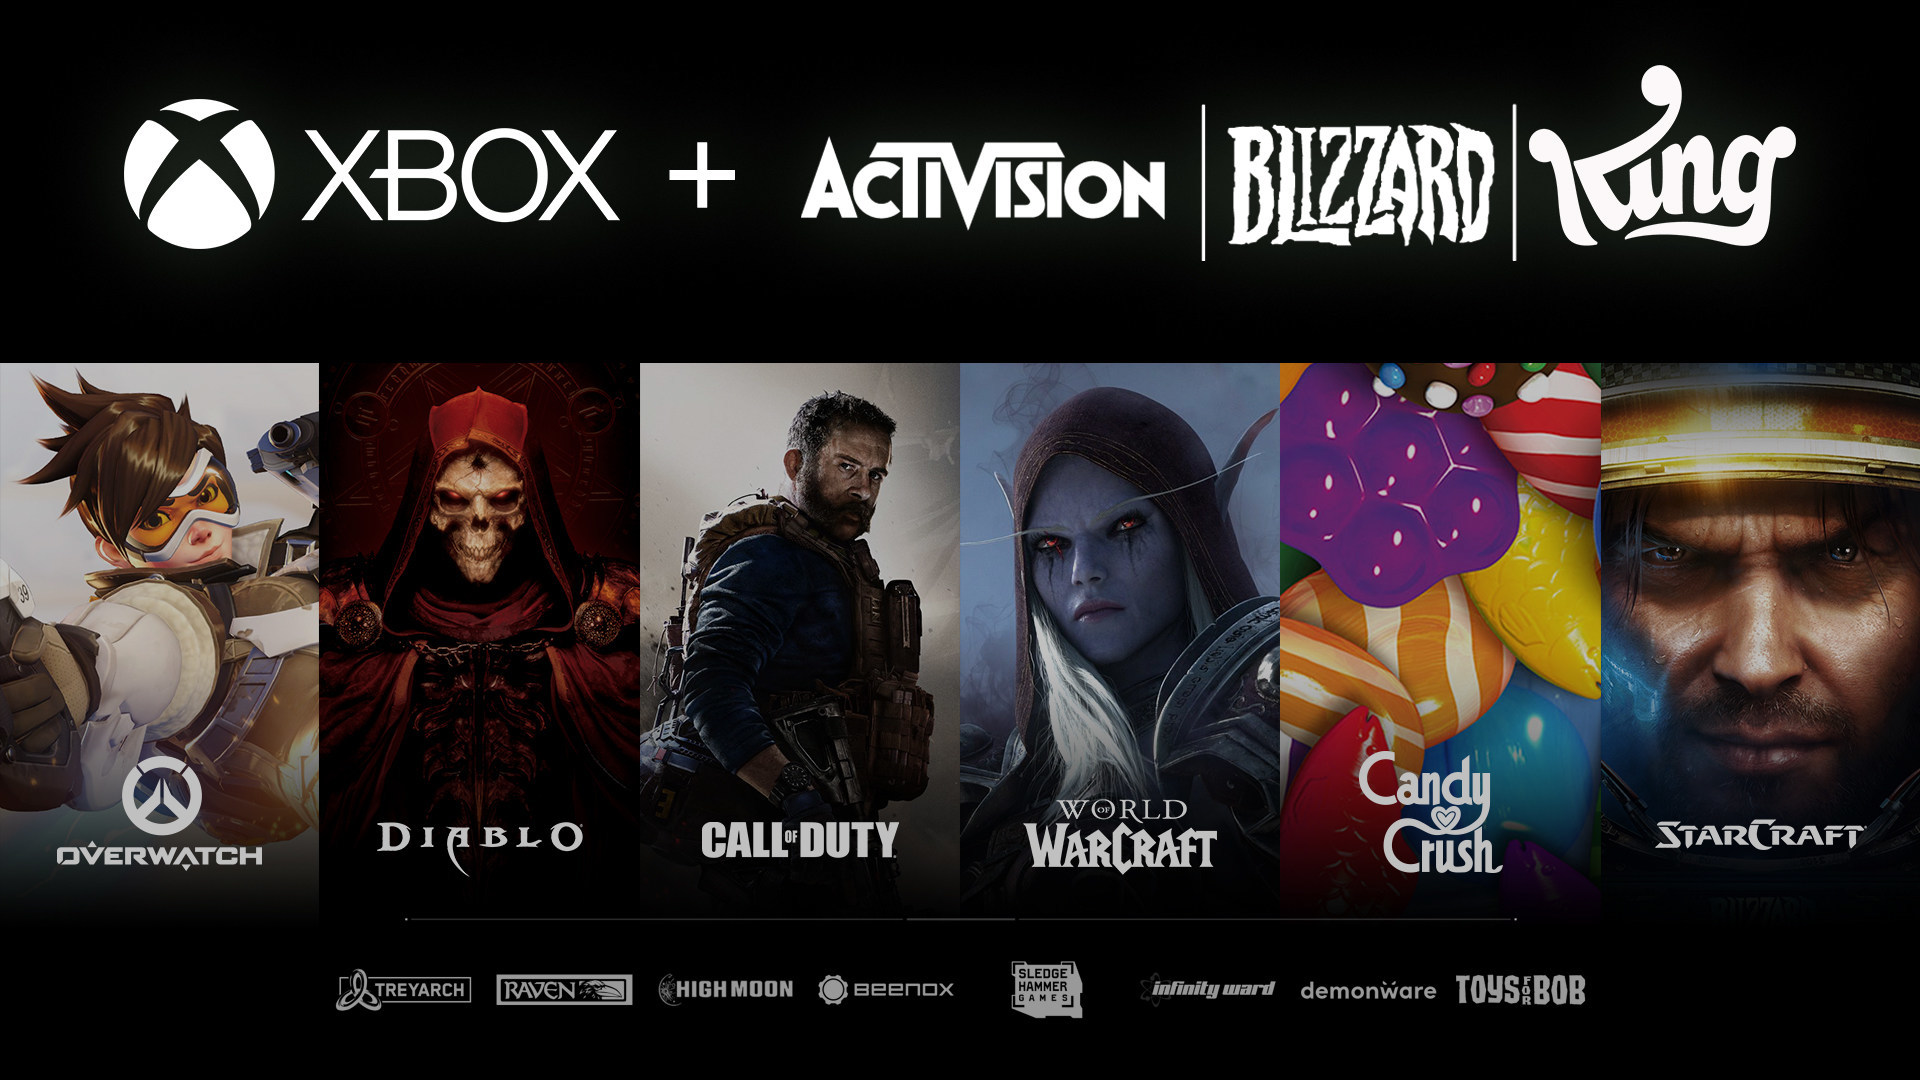 Microsoft is set to acquire Activision Blizzard at $68.7 billion and become the world’s third-largest gaming company